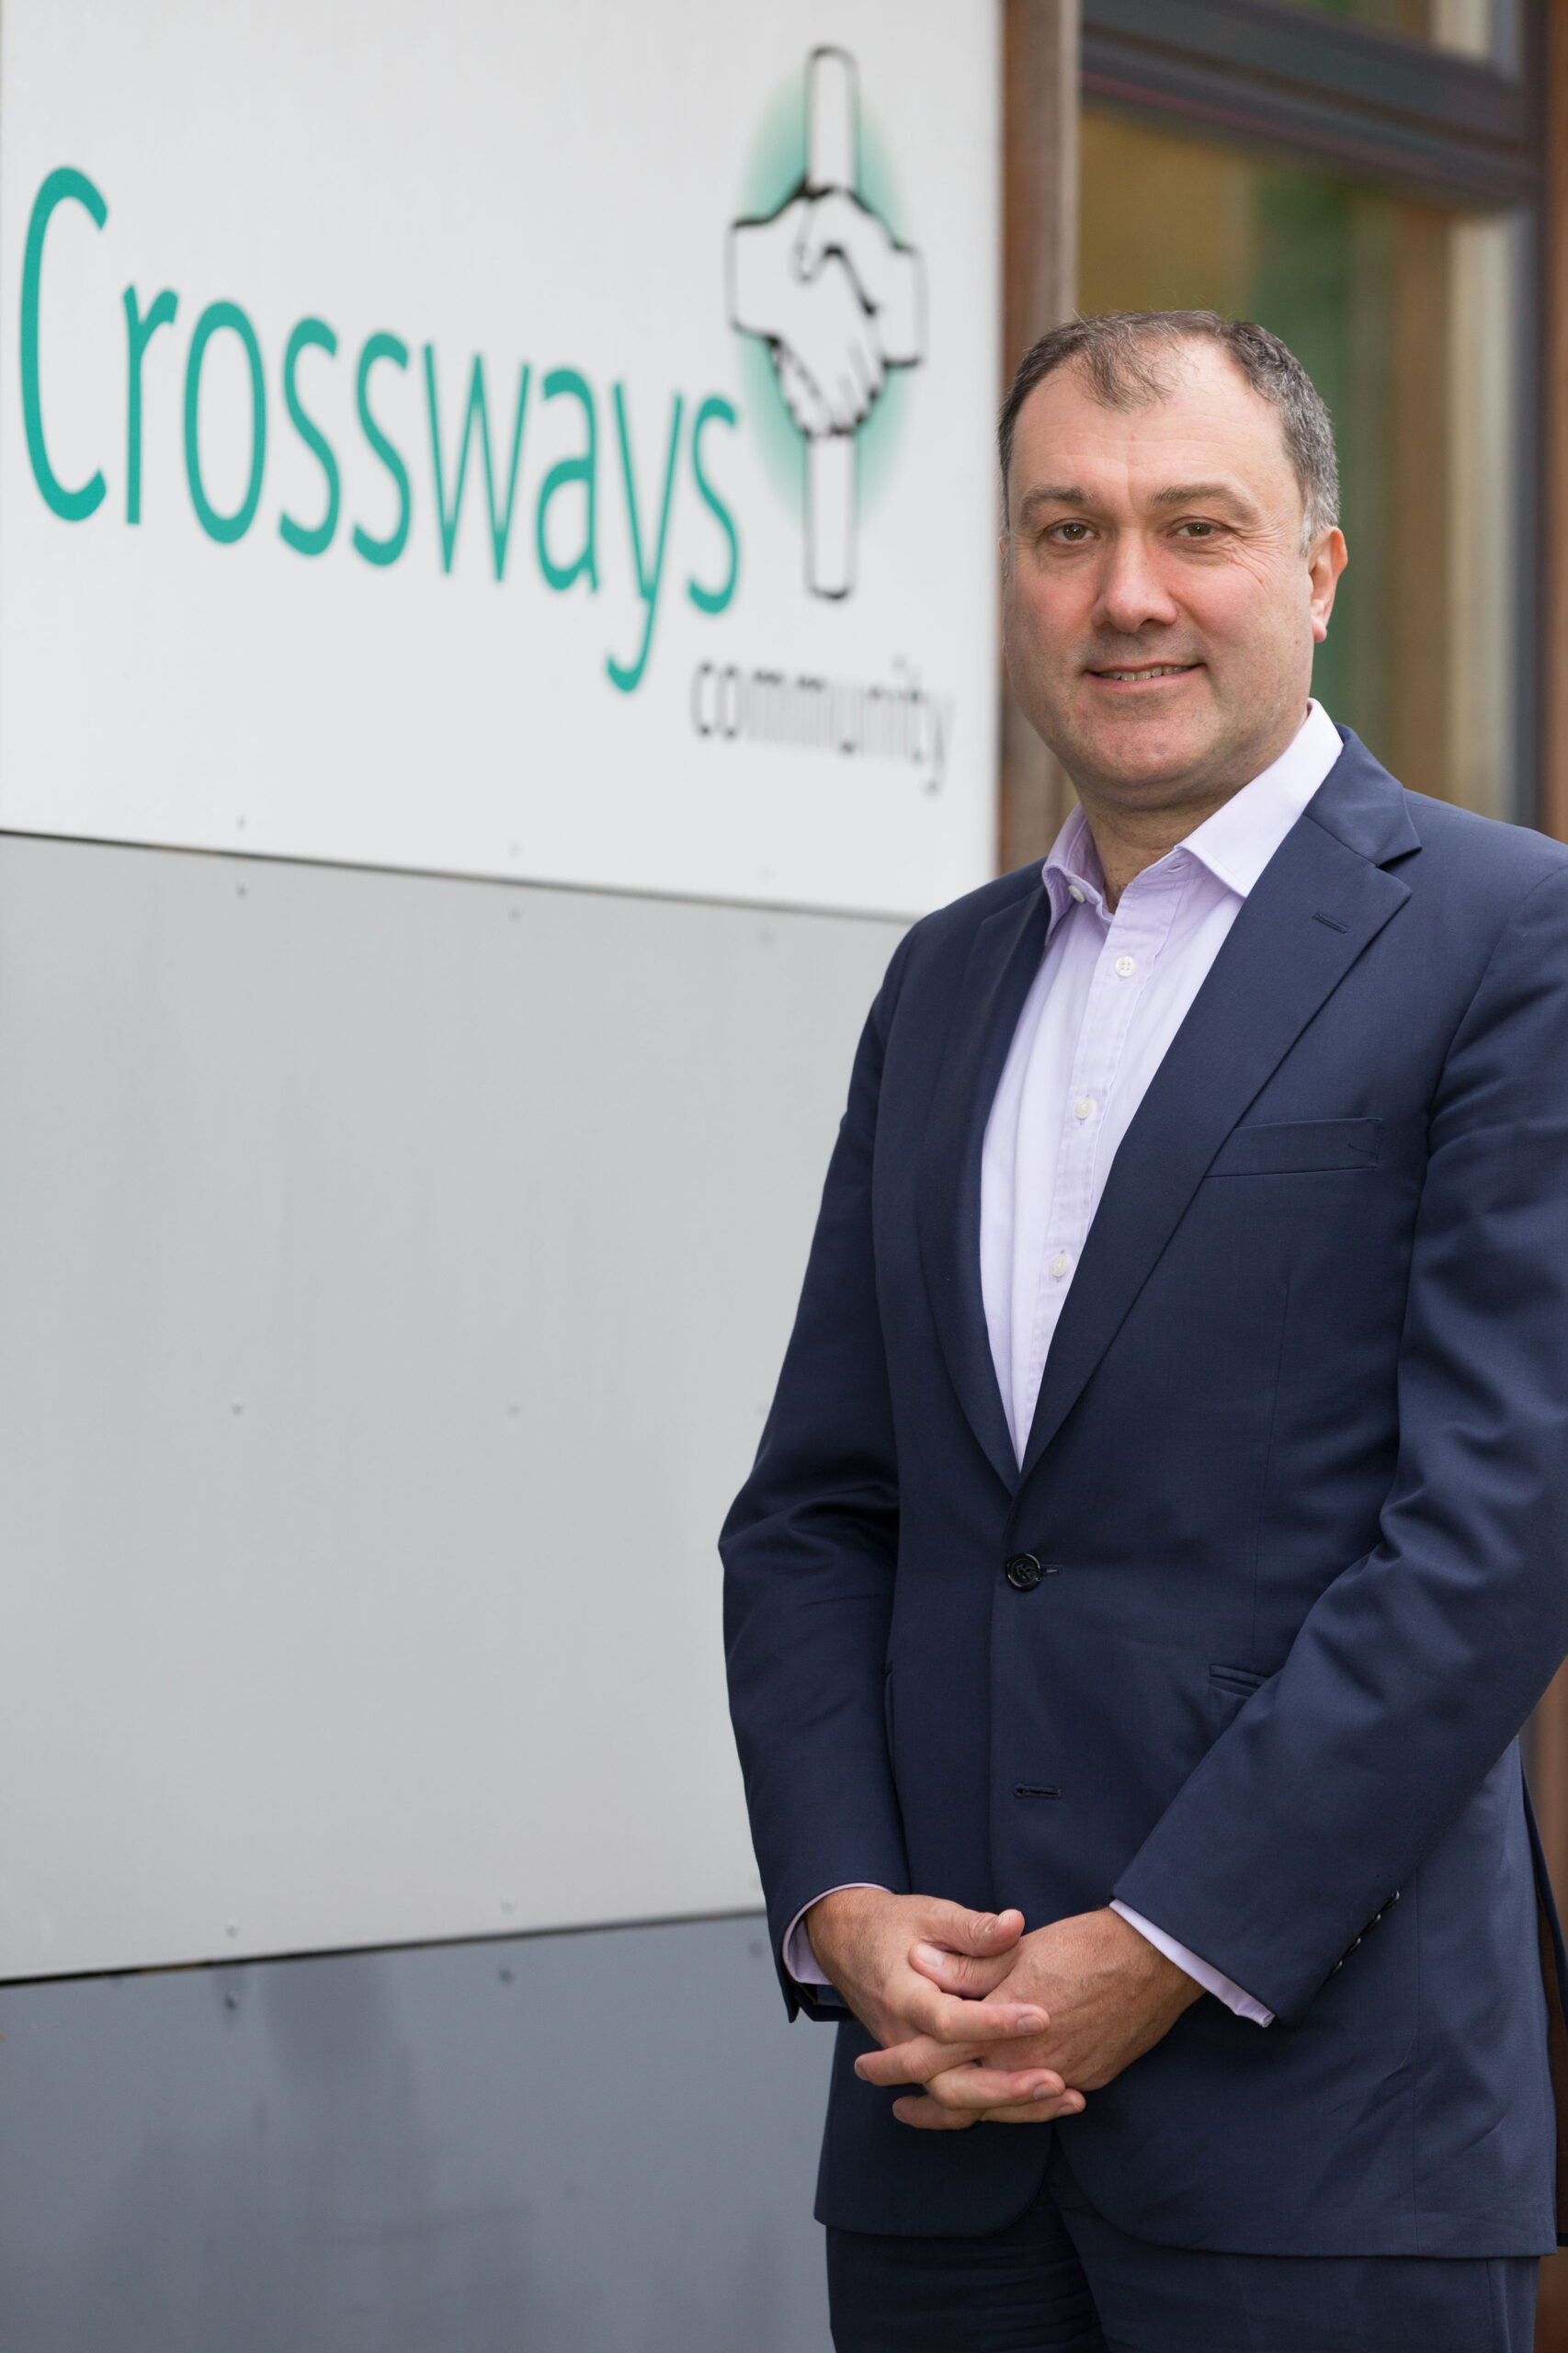 Court ruling victory for Crossways mental health charity